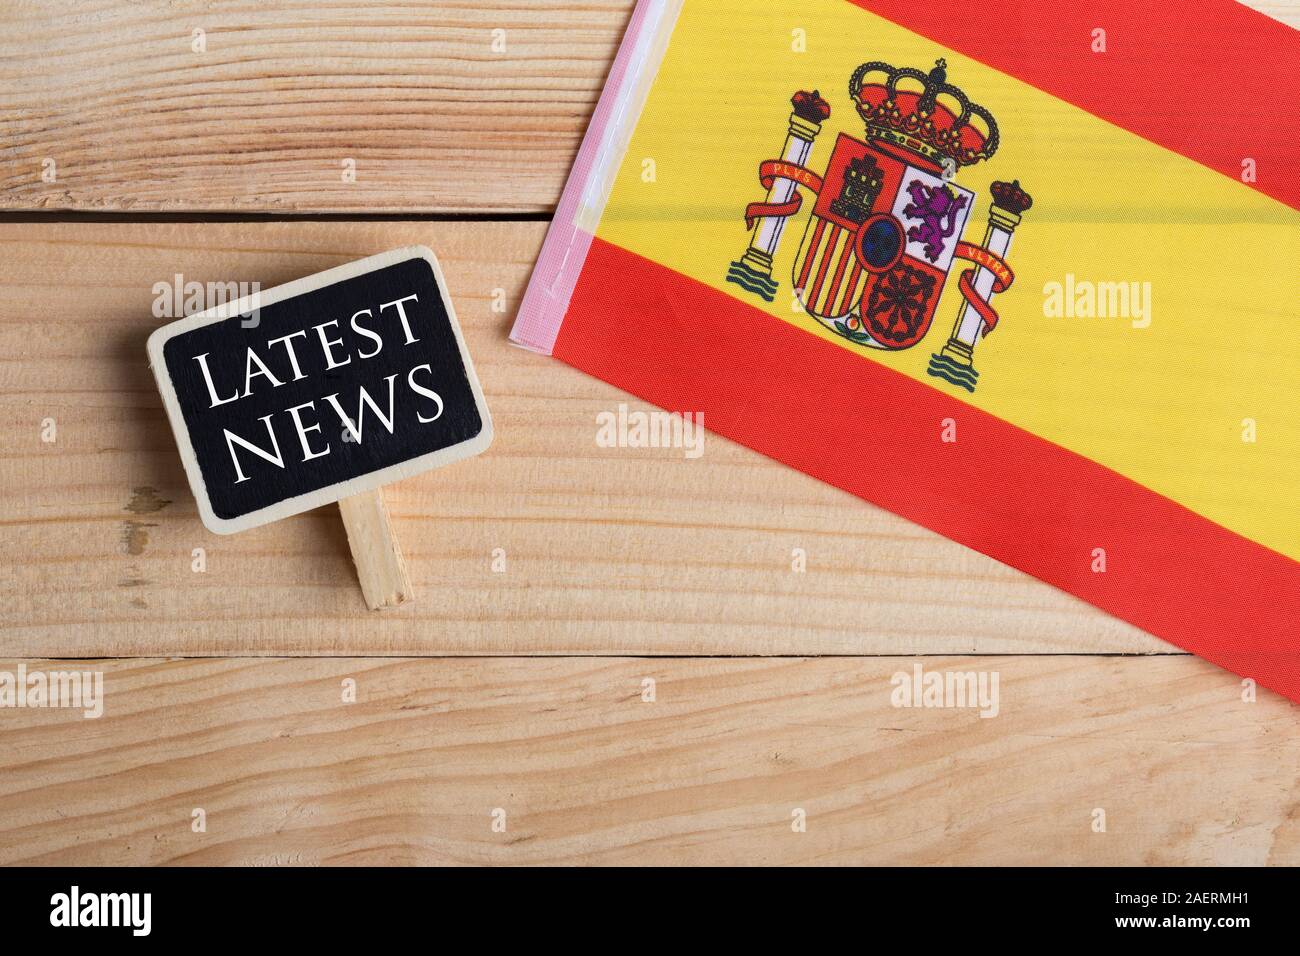 concept news feeds - Breaking news, Spain country's flag, blackboard and the text Latest News on wooden background Stock Photo